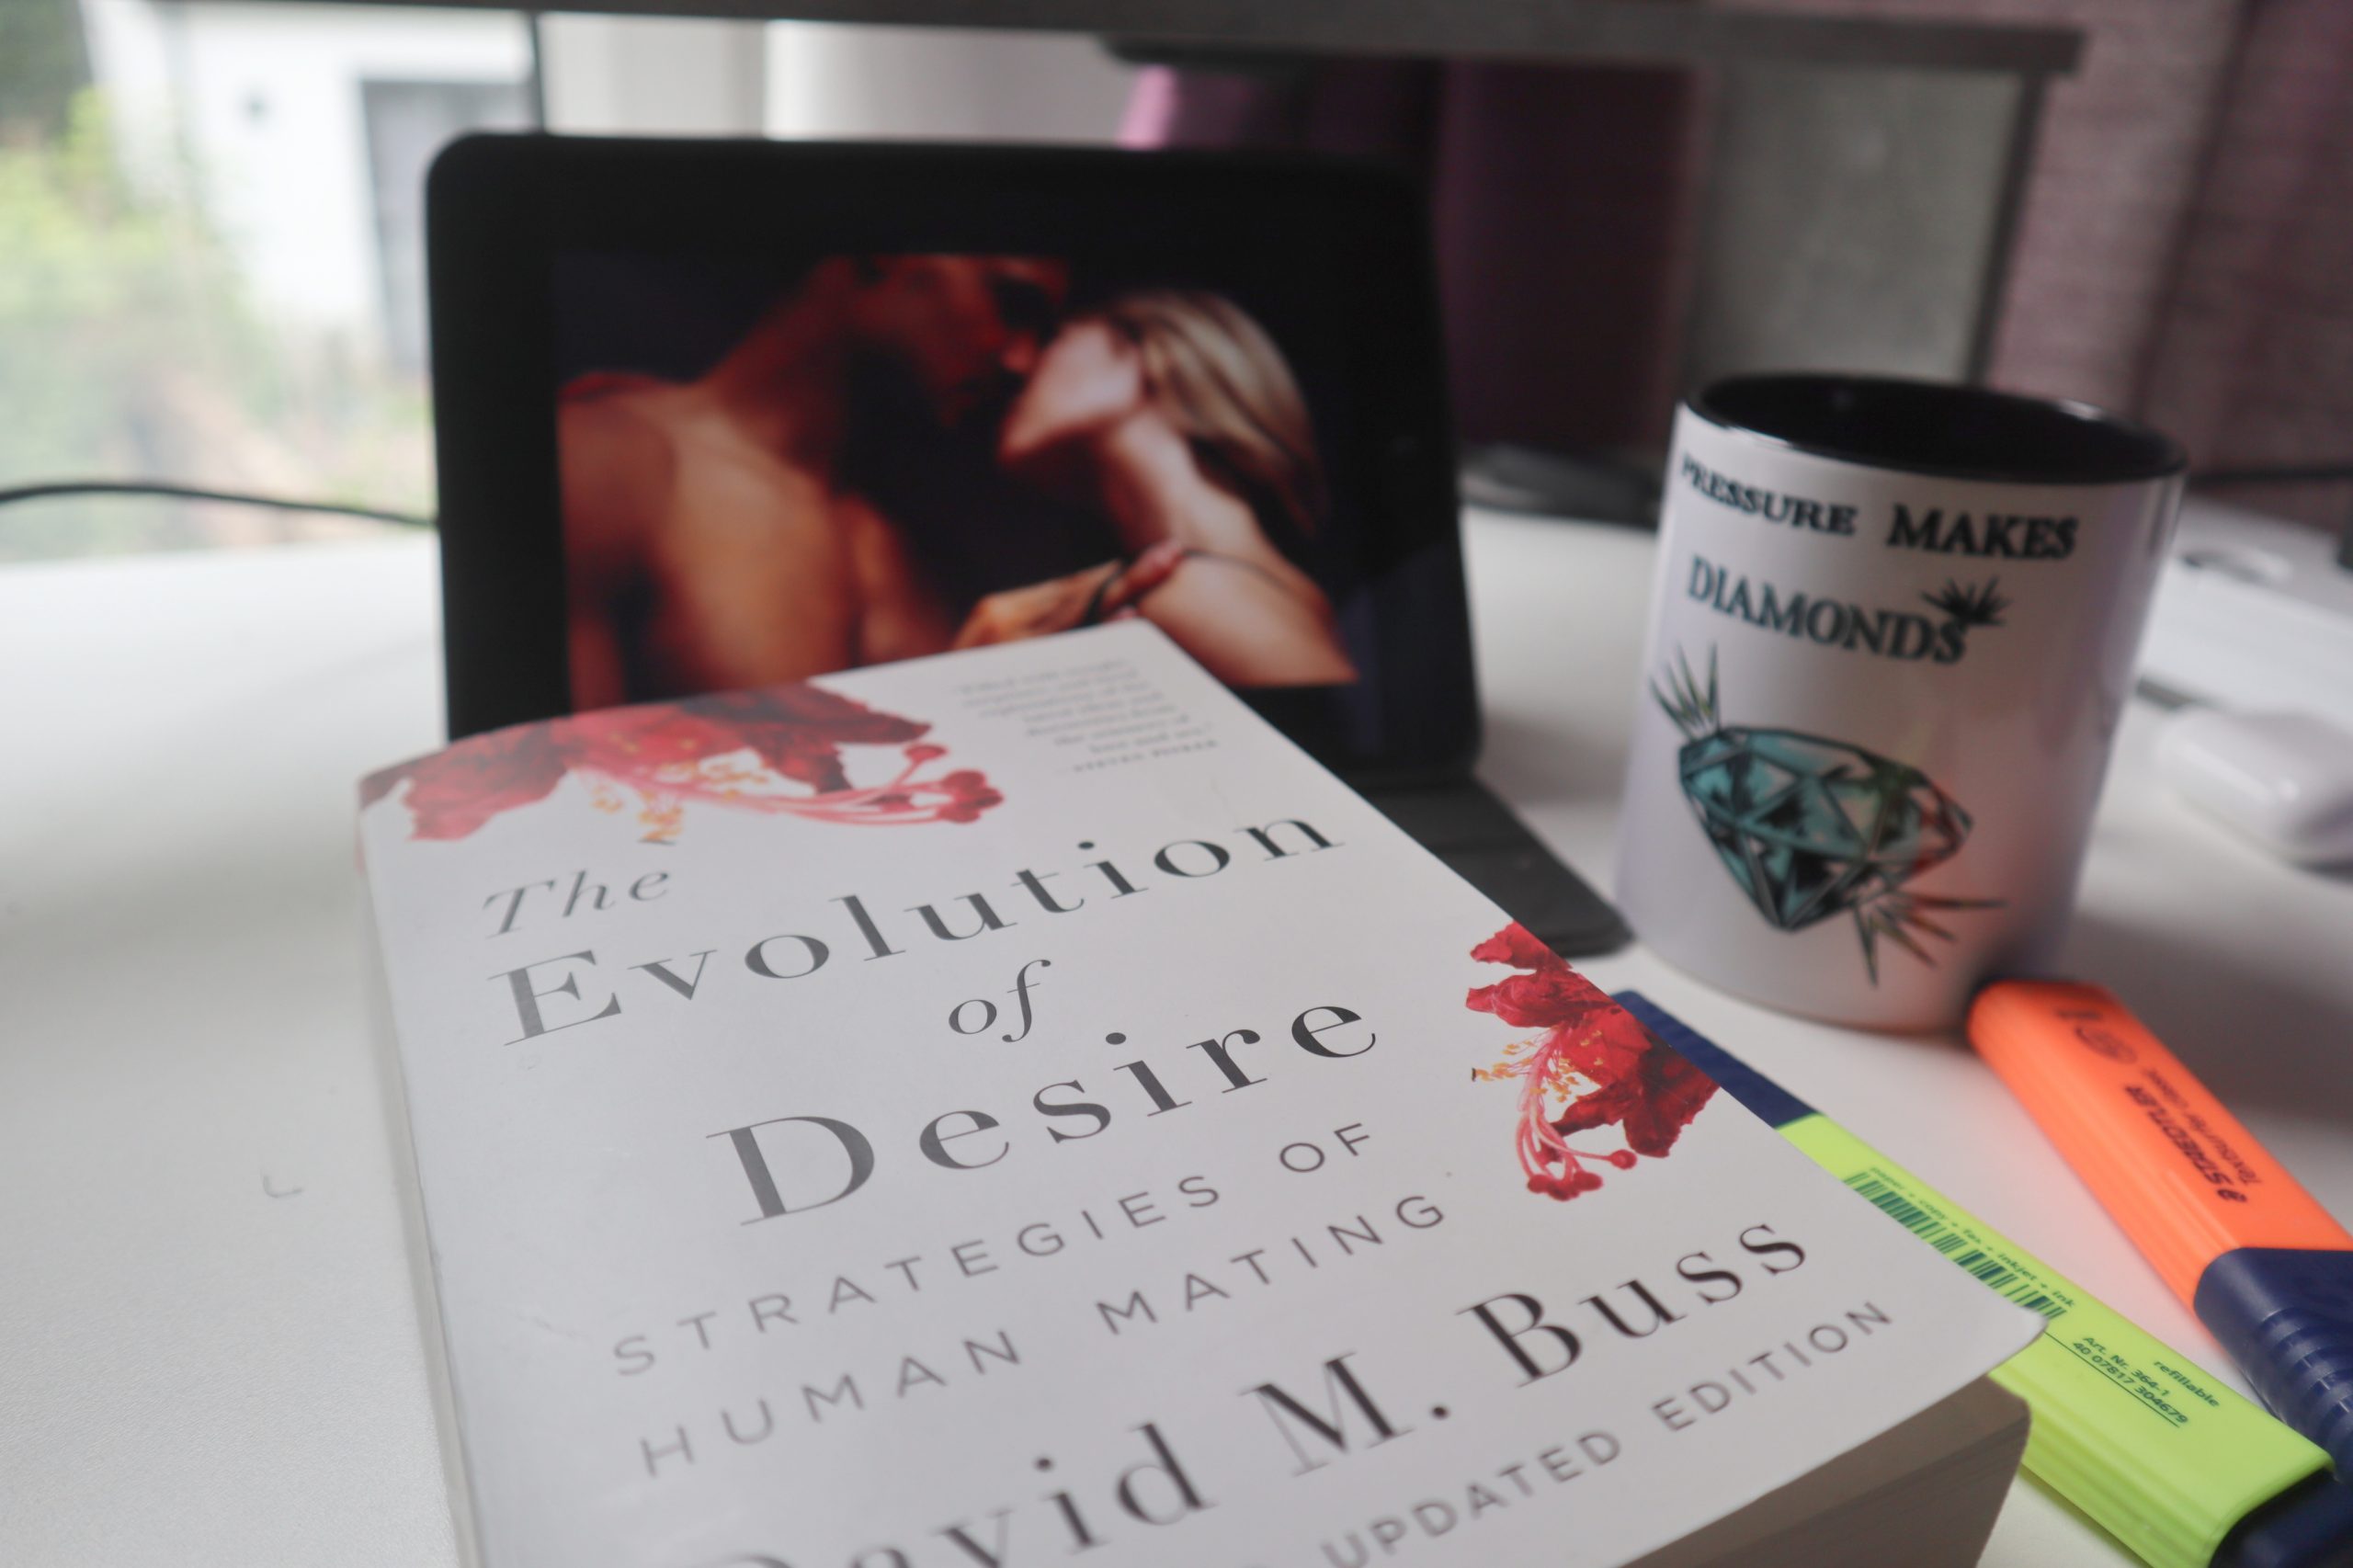 Desk reading Evolution of Desire: Strategies of Human Mating sexual pyschology book by David Buss, the psychologist who specialises in dating, marriage and relationship research observation studies on a desk table and coffee cup/mug